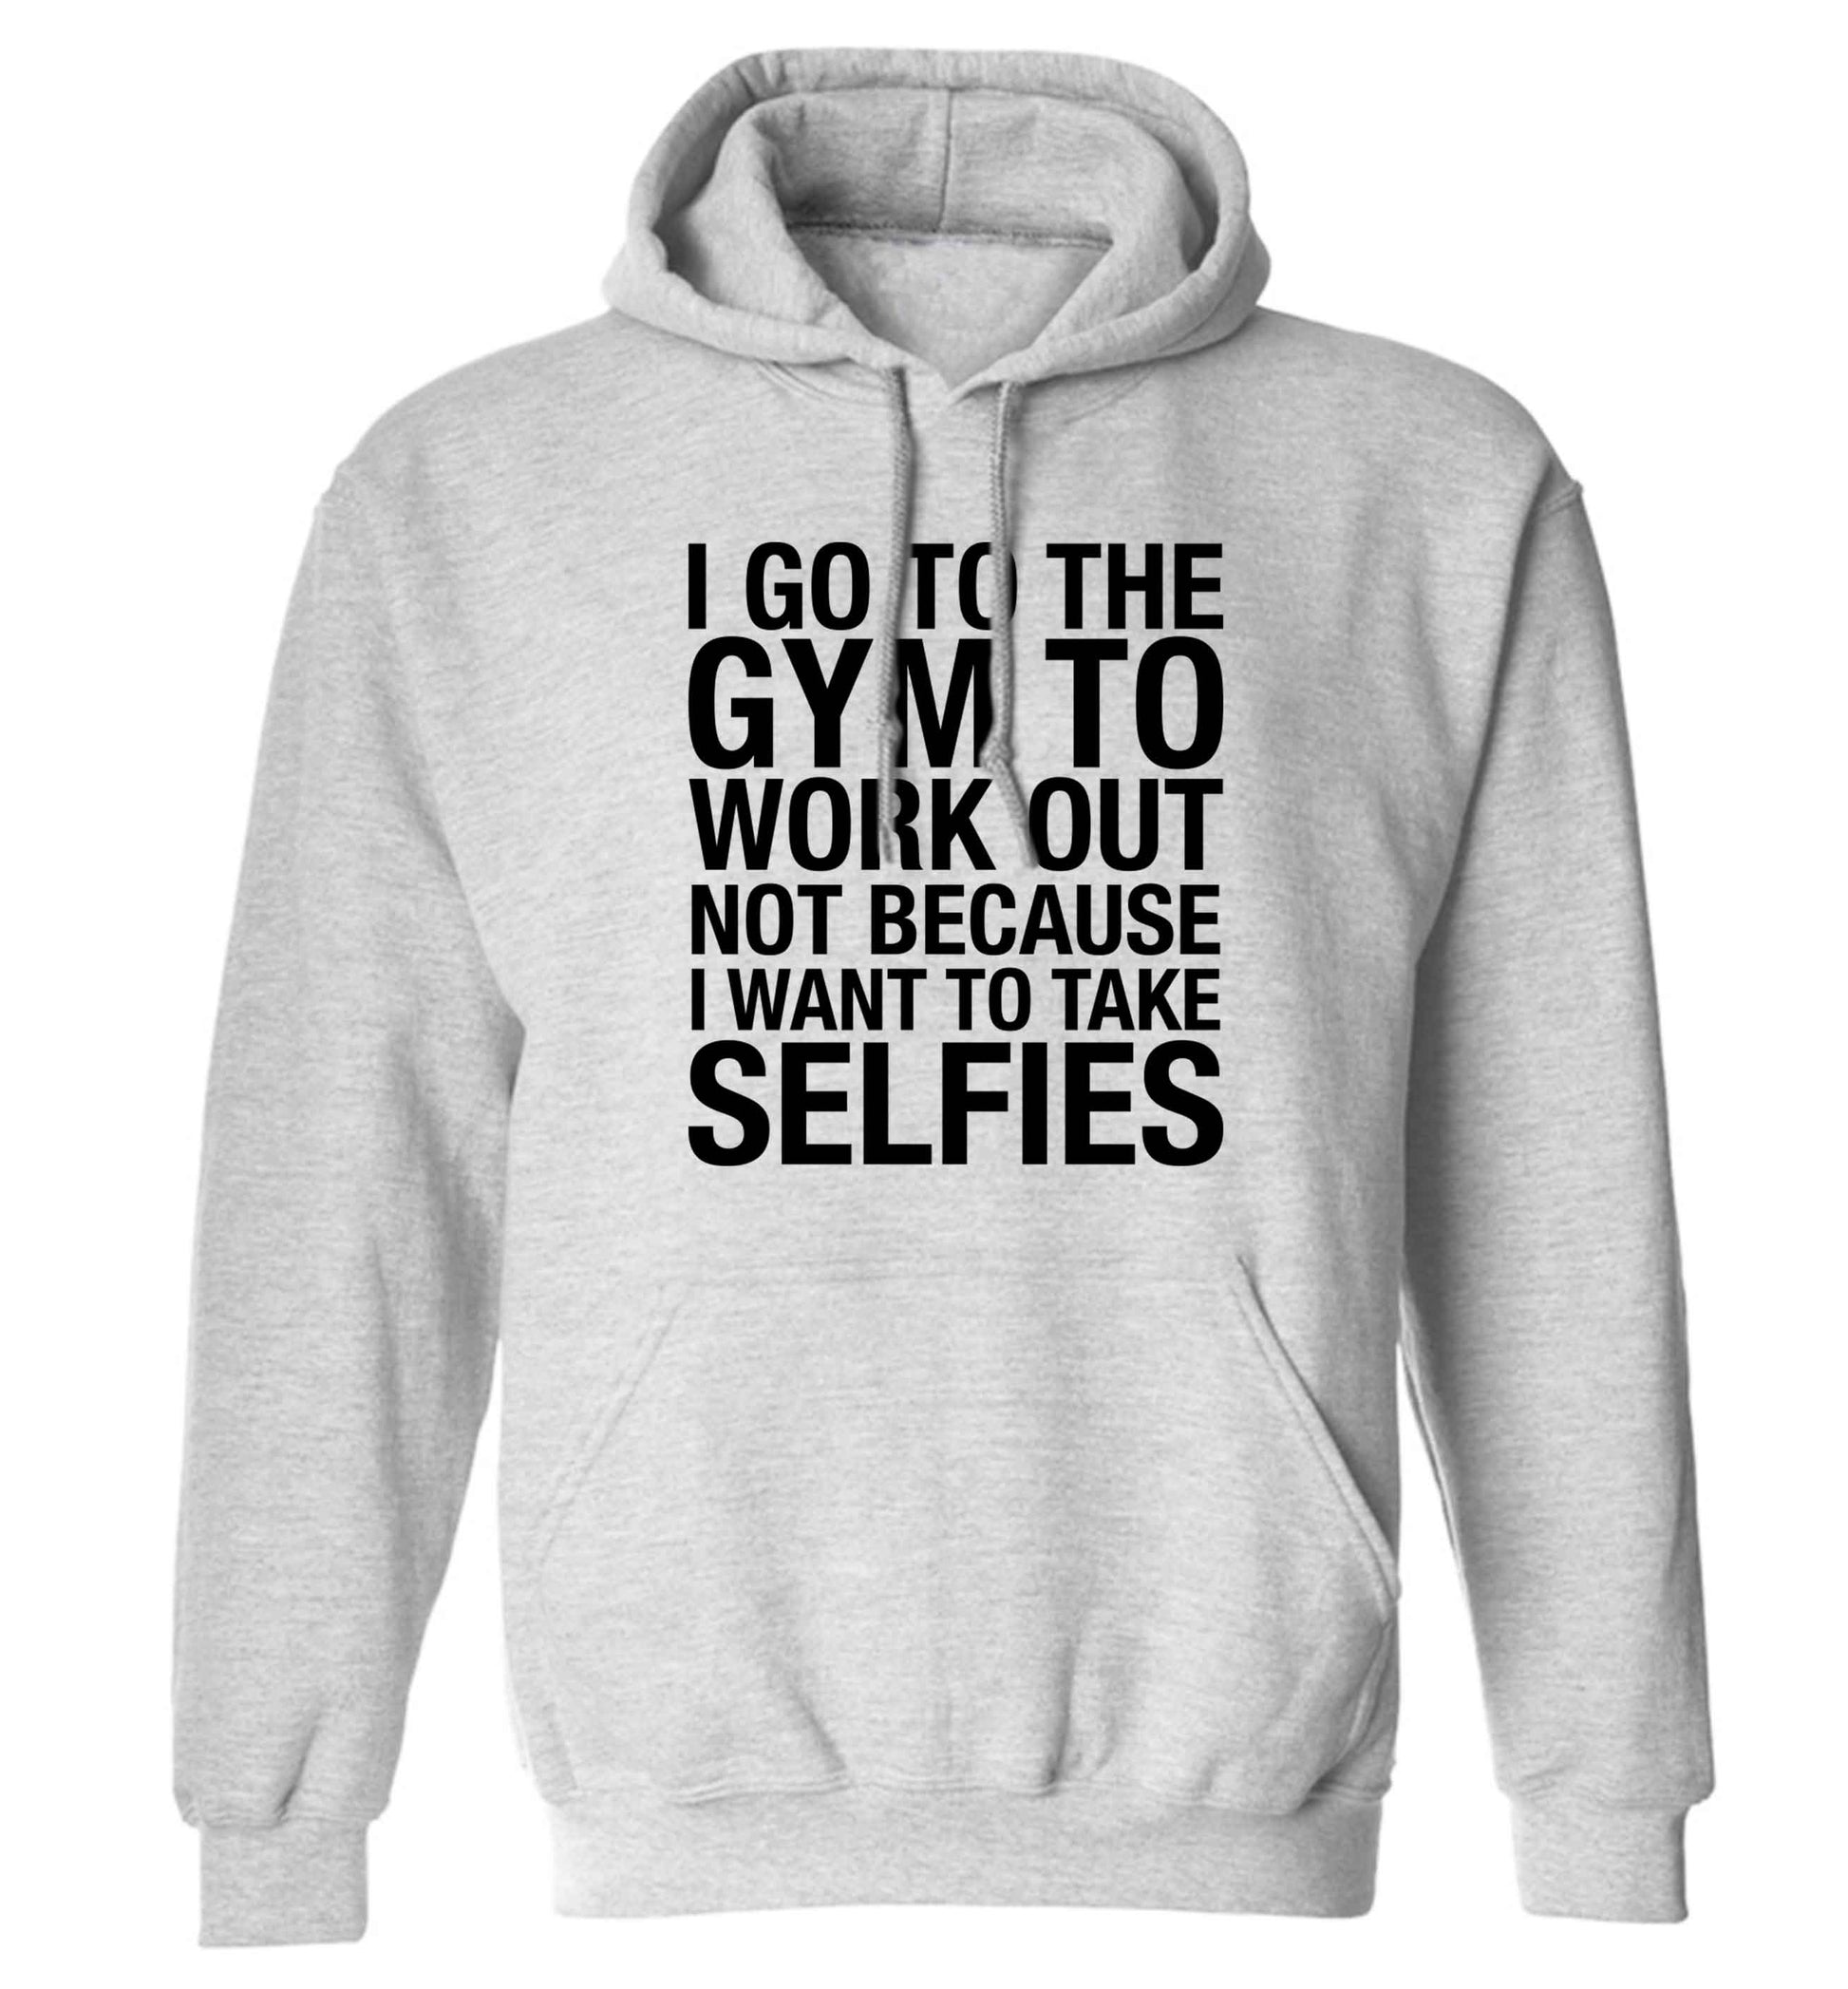 I go to the gym to workout not to take selfies adults unisex grey hoodie 2XL